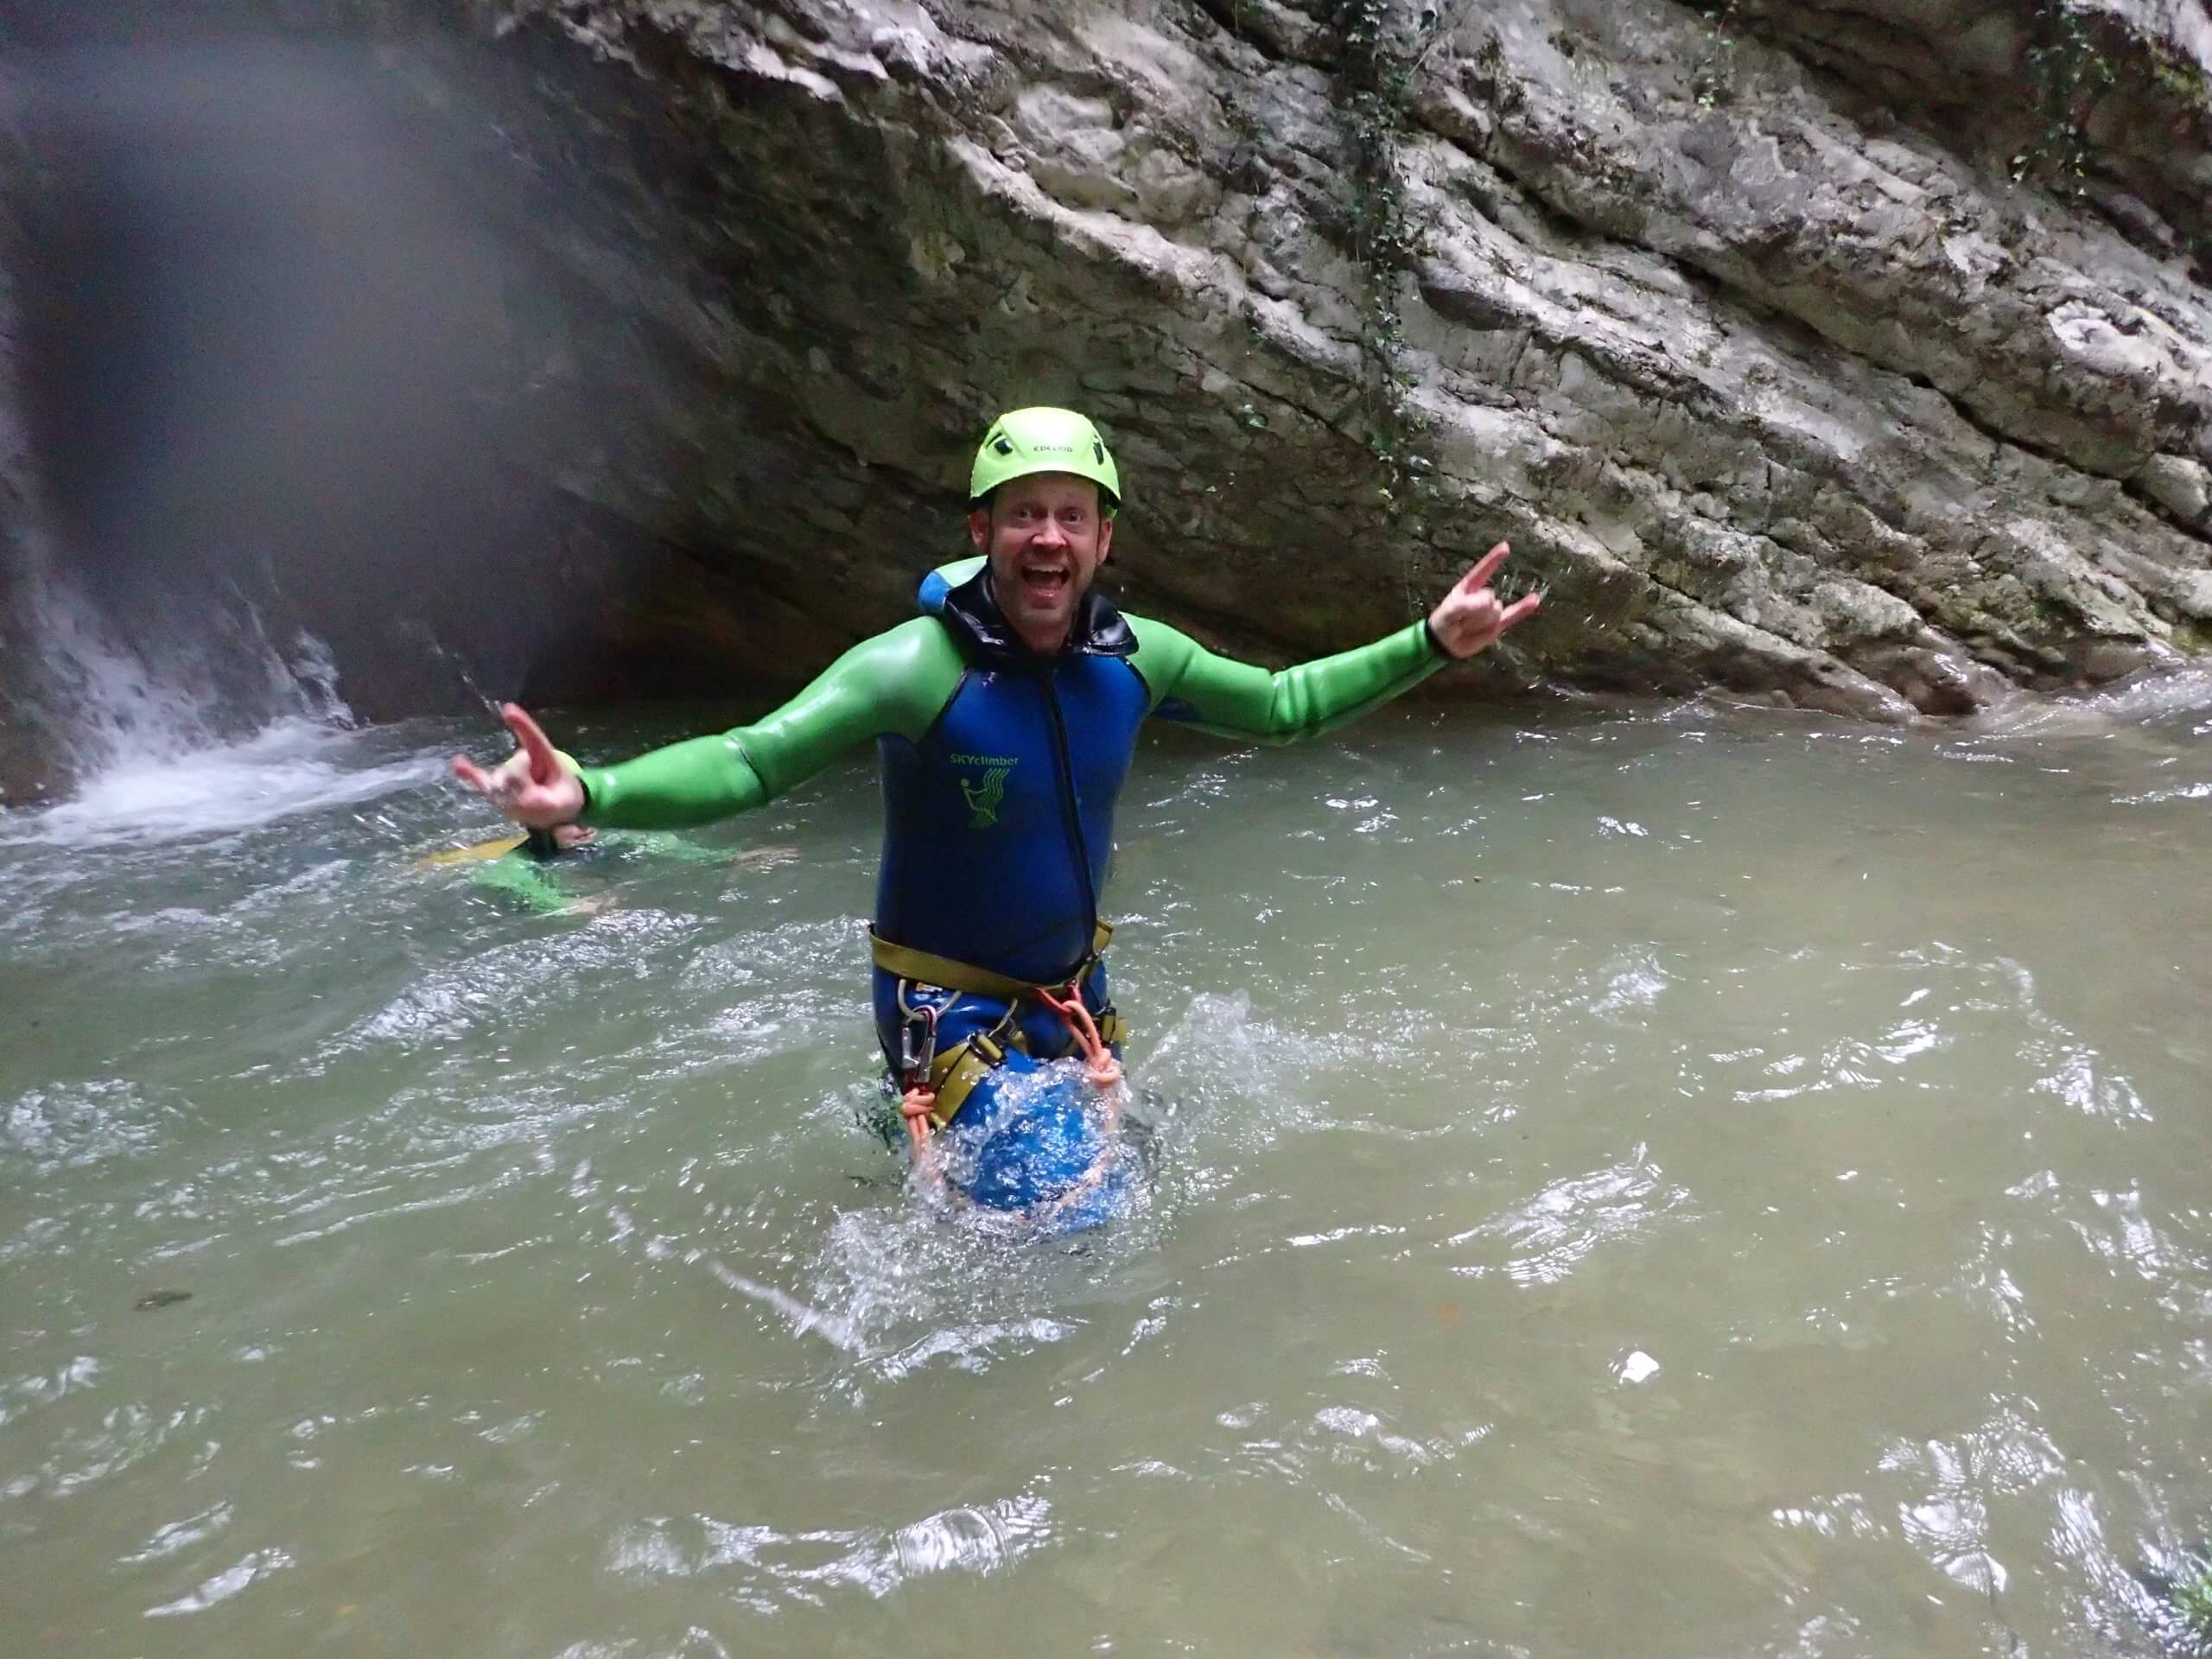 Andy Canyoning standing in the water